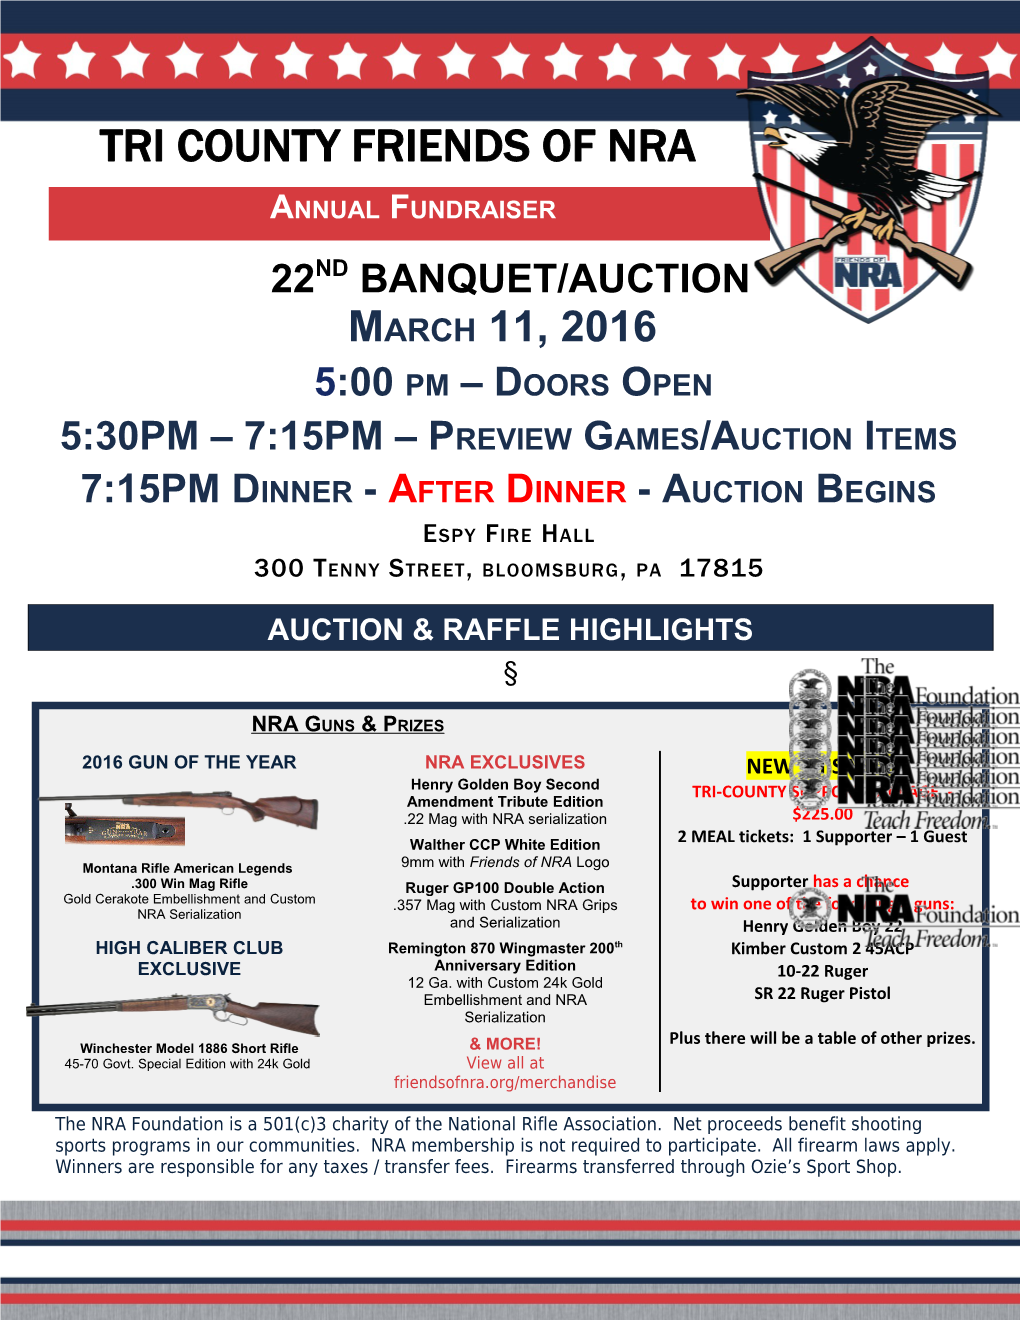 5:30PM 7:15PM Preview Games/Auction Items